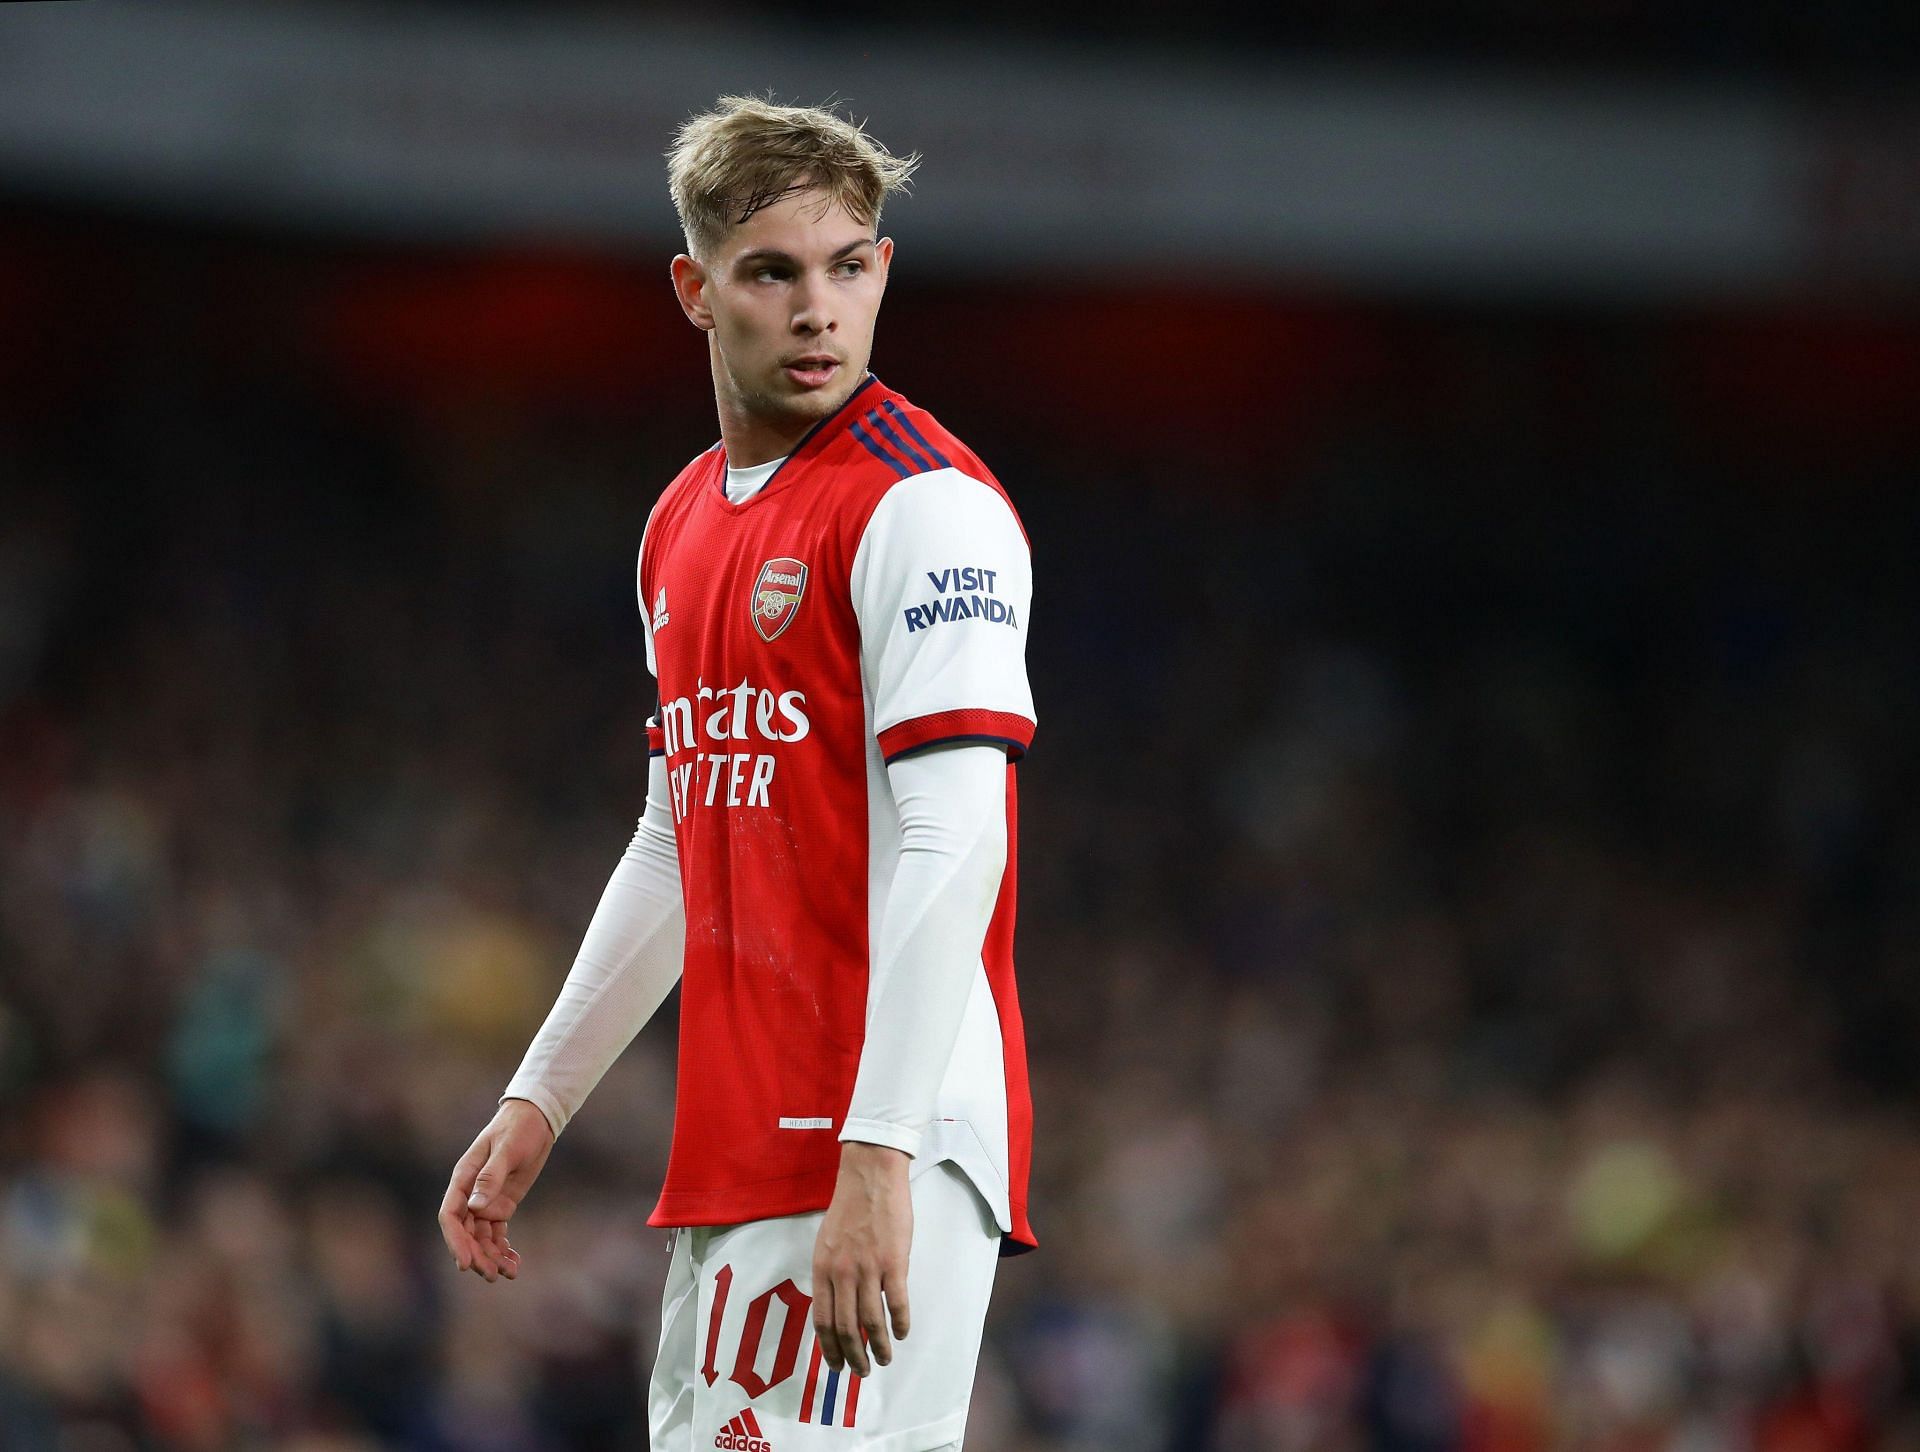 Arsenal youngster Emile Smith-Rowe has impressed this season